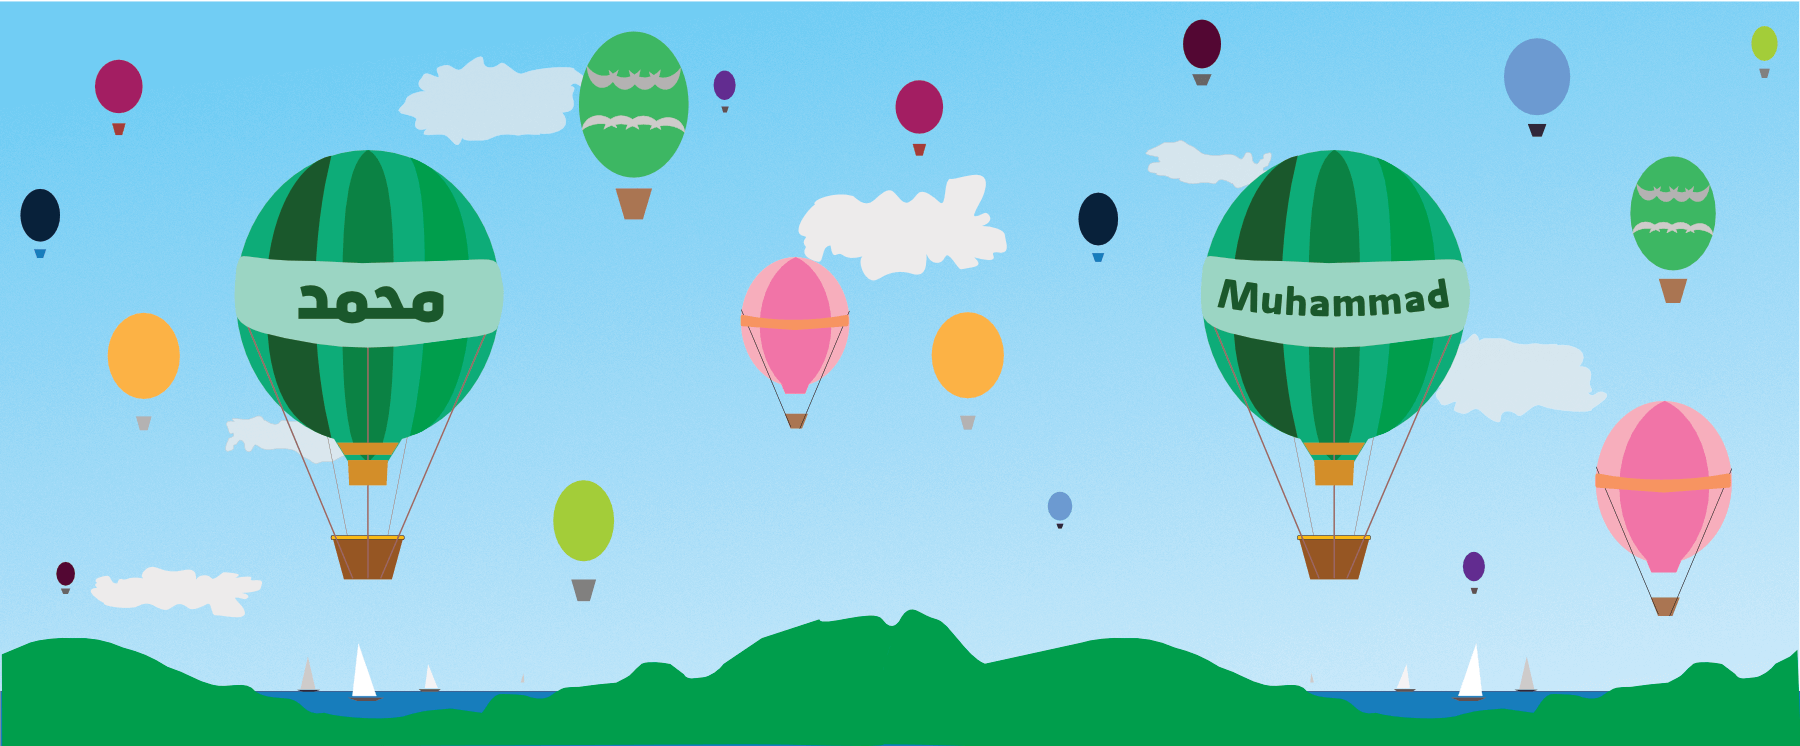 'Ballooning' is the Haluna Happy Names  fun personalised 'Design of the Month' with a discount for all products ordered by members of the Haluna Happy Names Family. It is available in green or purple with English or Arabic personalisation.  